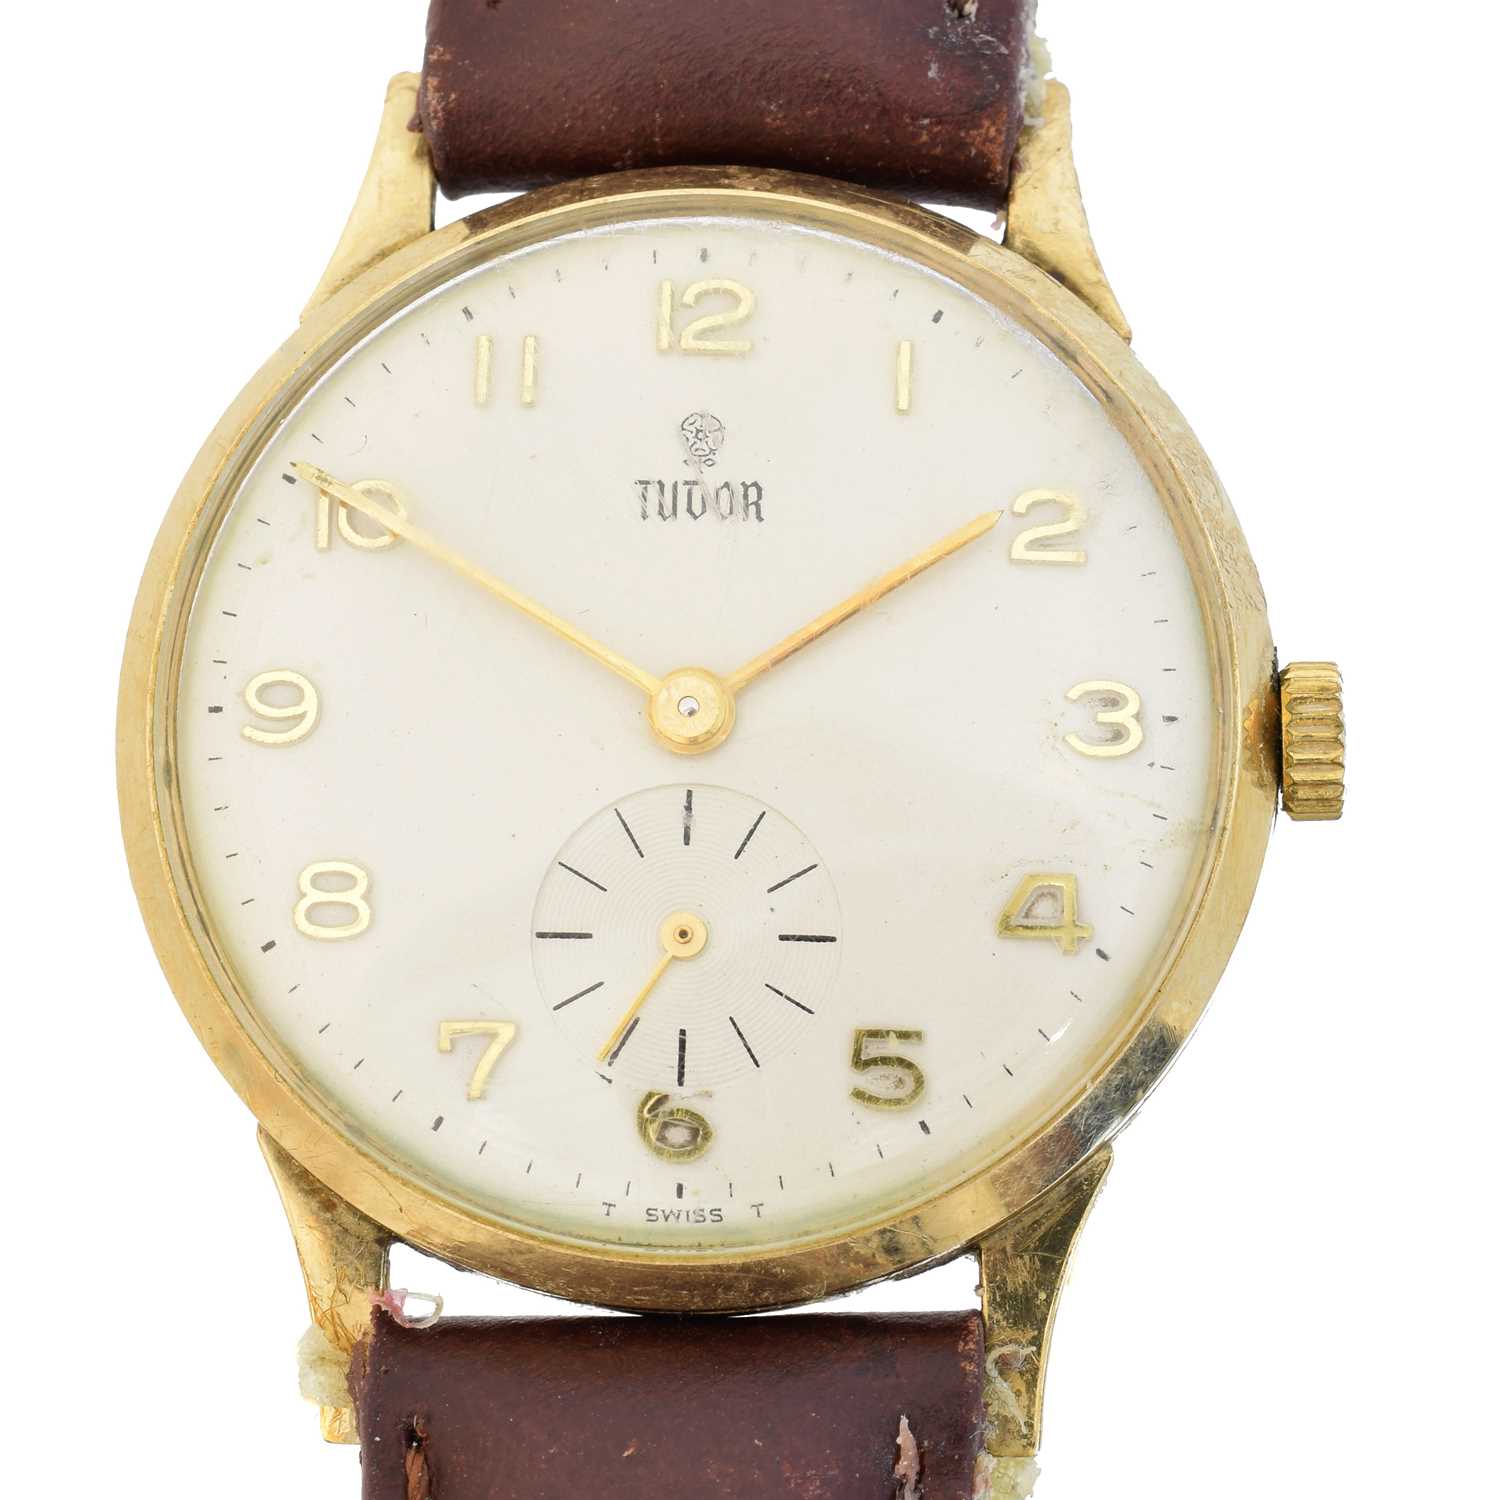 Lot A 1960s 9ct gold cased Tudor watch